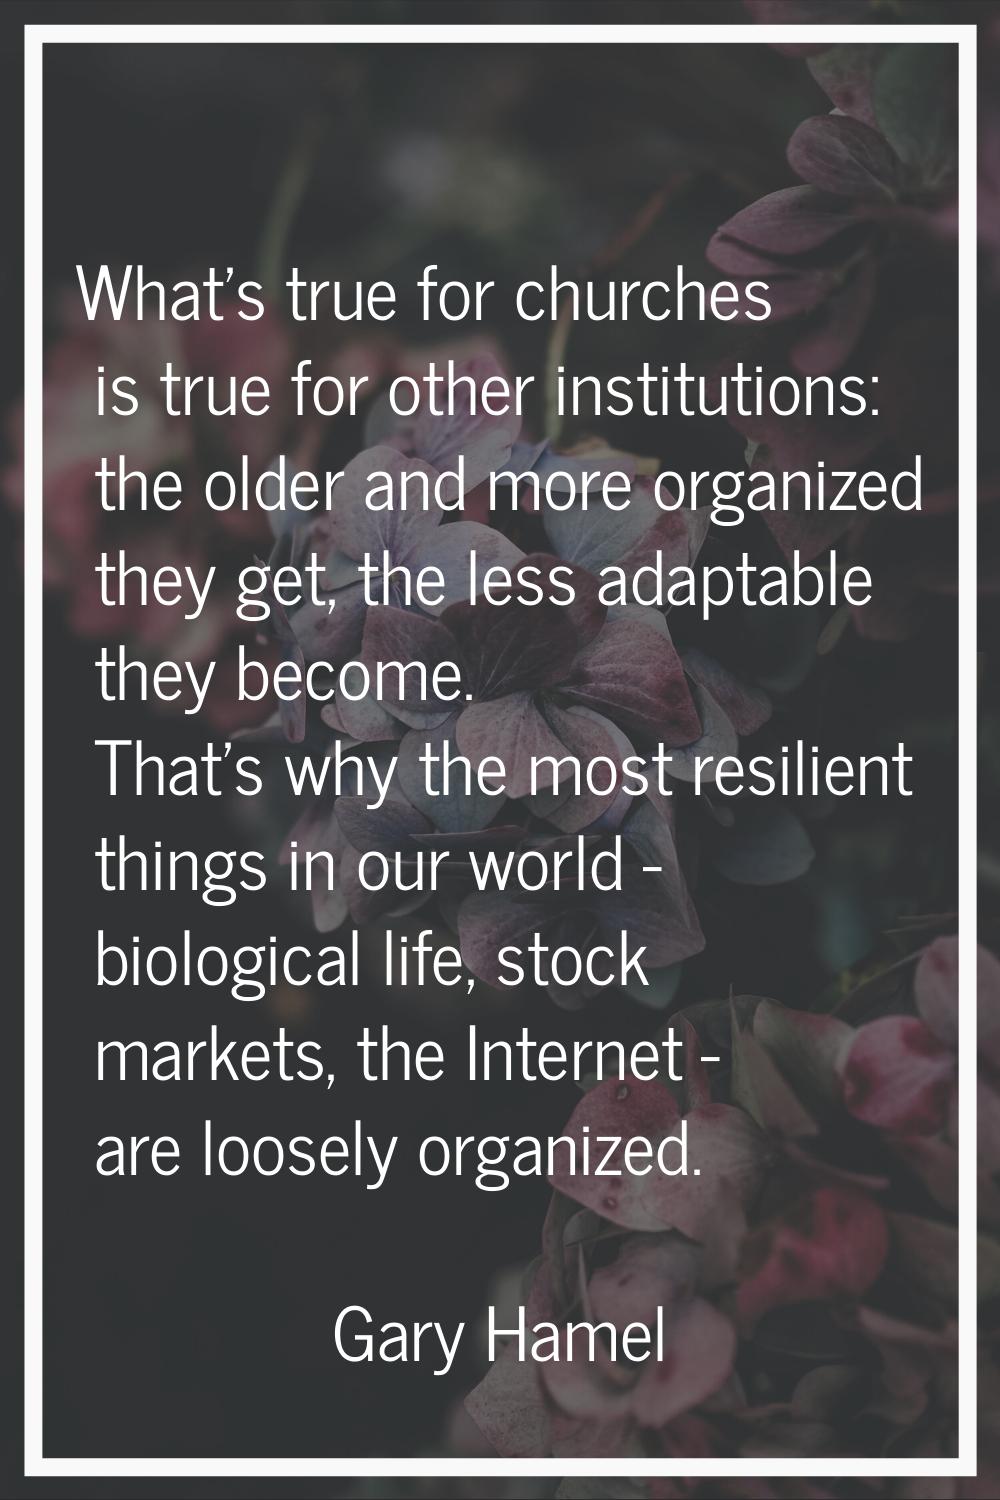 What's true for churches is true for other institutions: the older and more organized they get, the